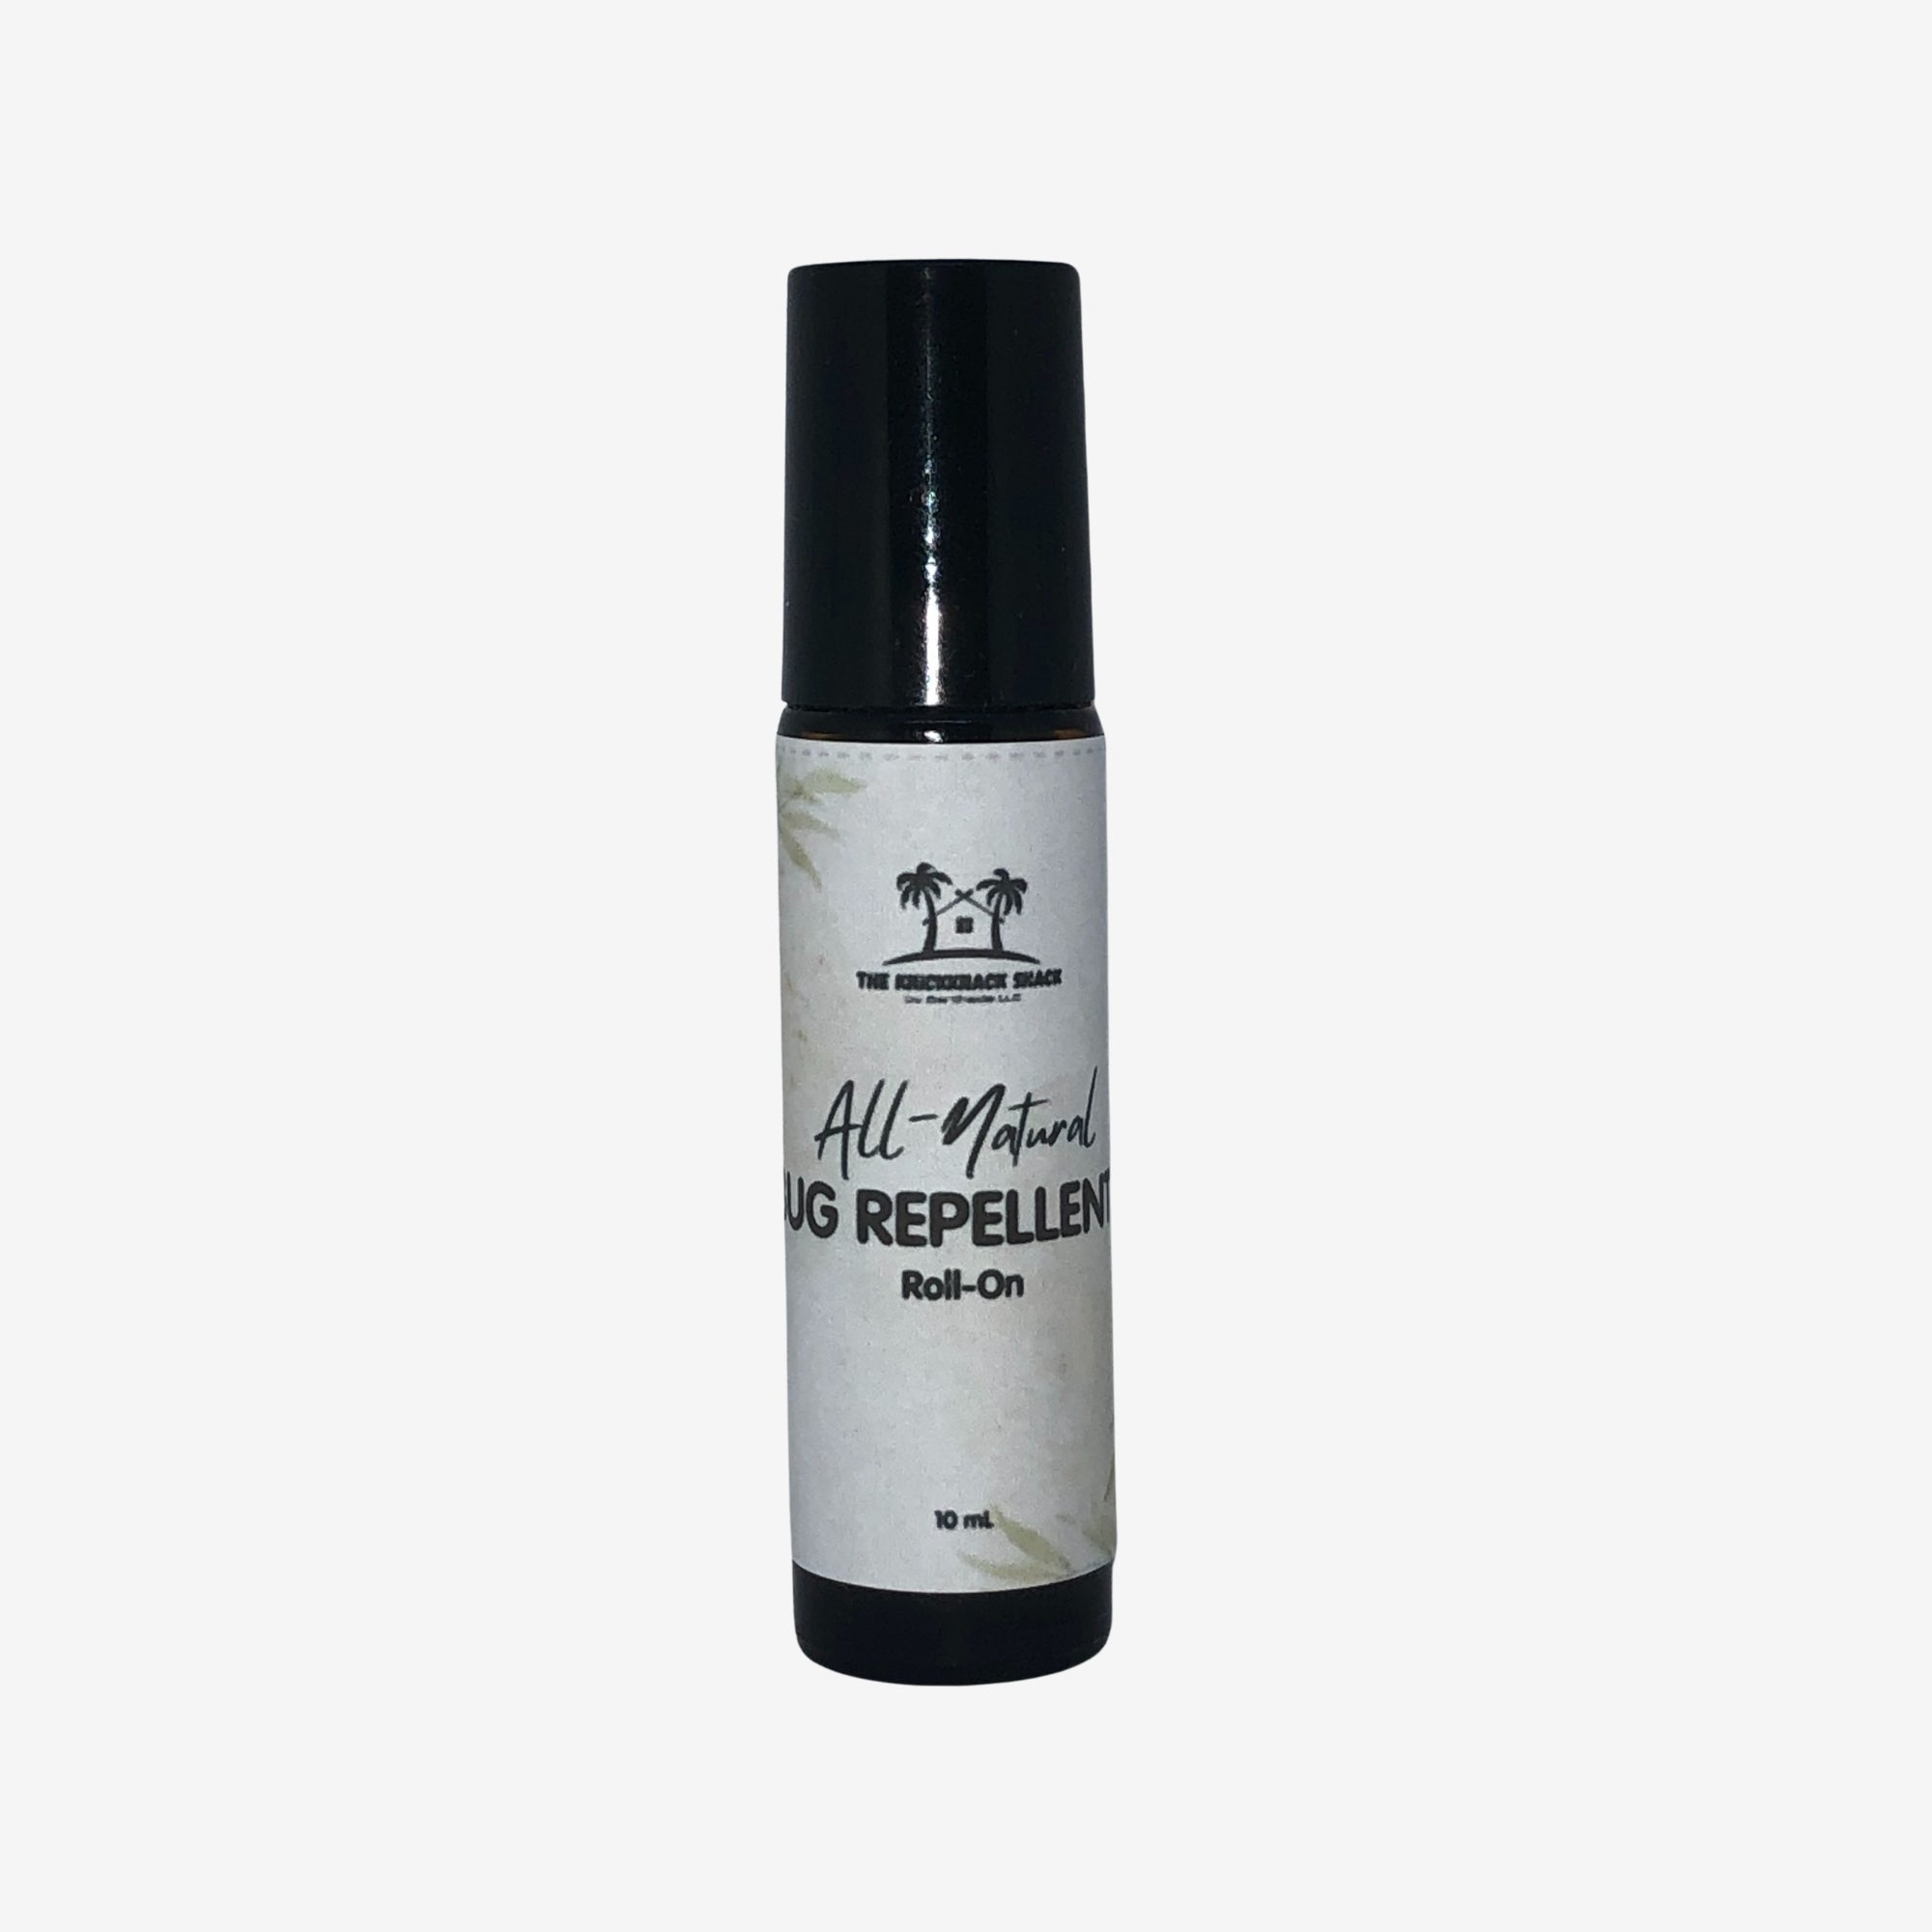 All-Natural Bug Repellent Roll-On